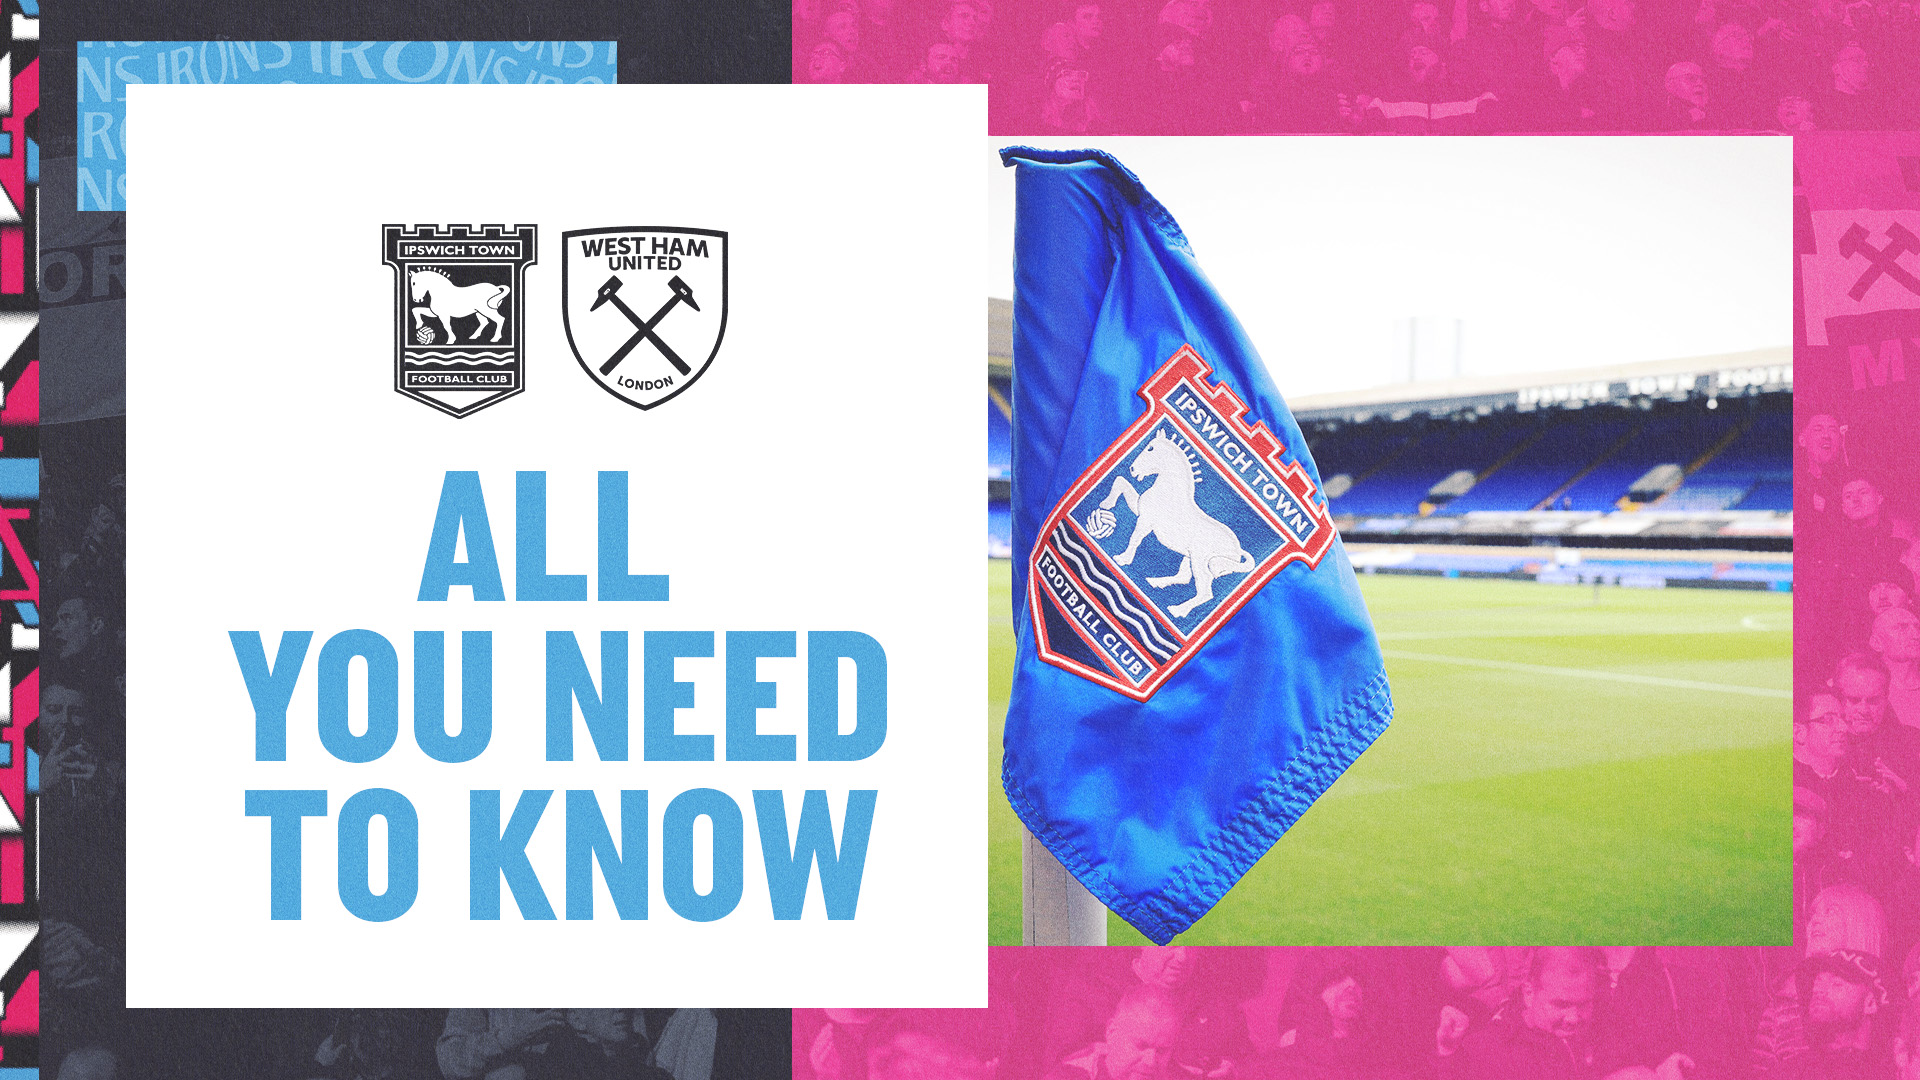 Ipswich Town v West Ham U18s - All You Need To Know graphic